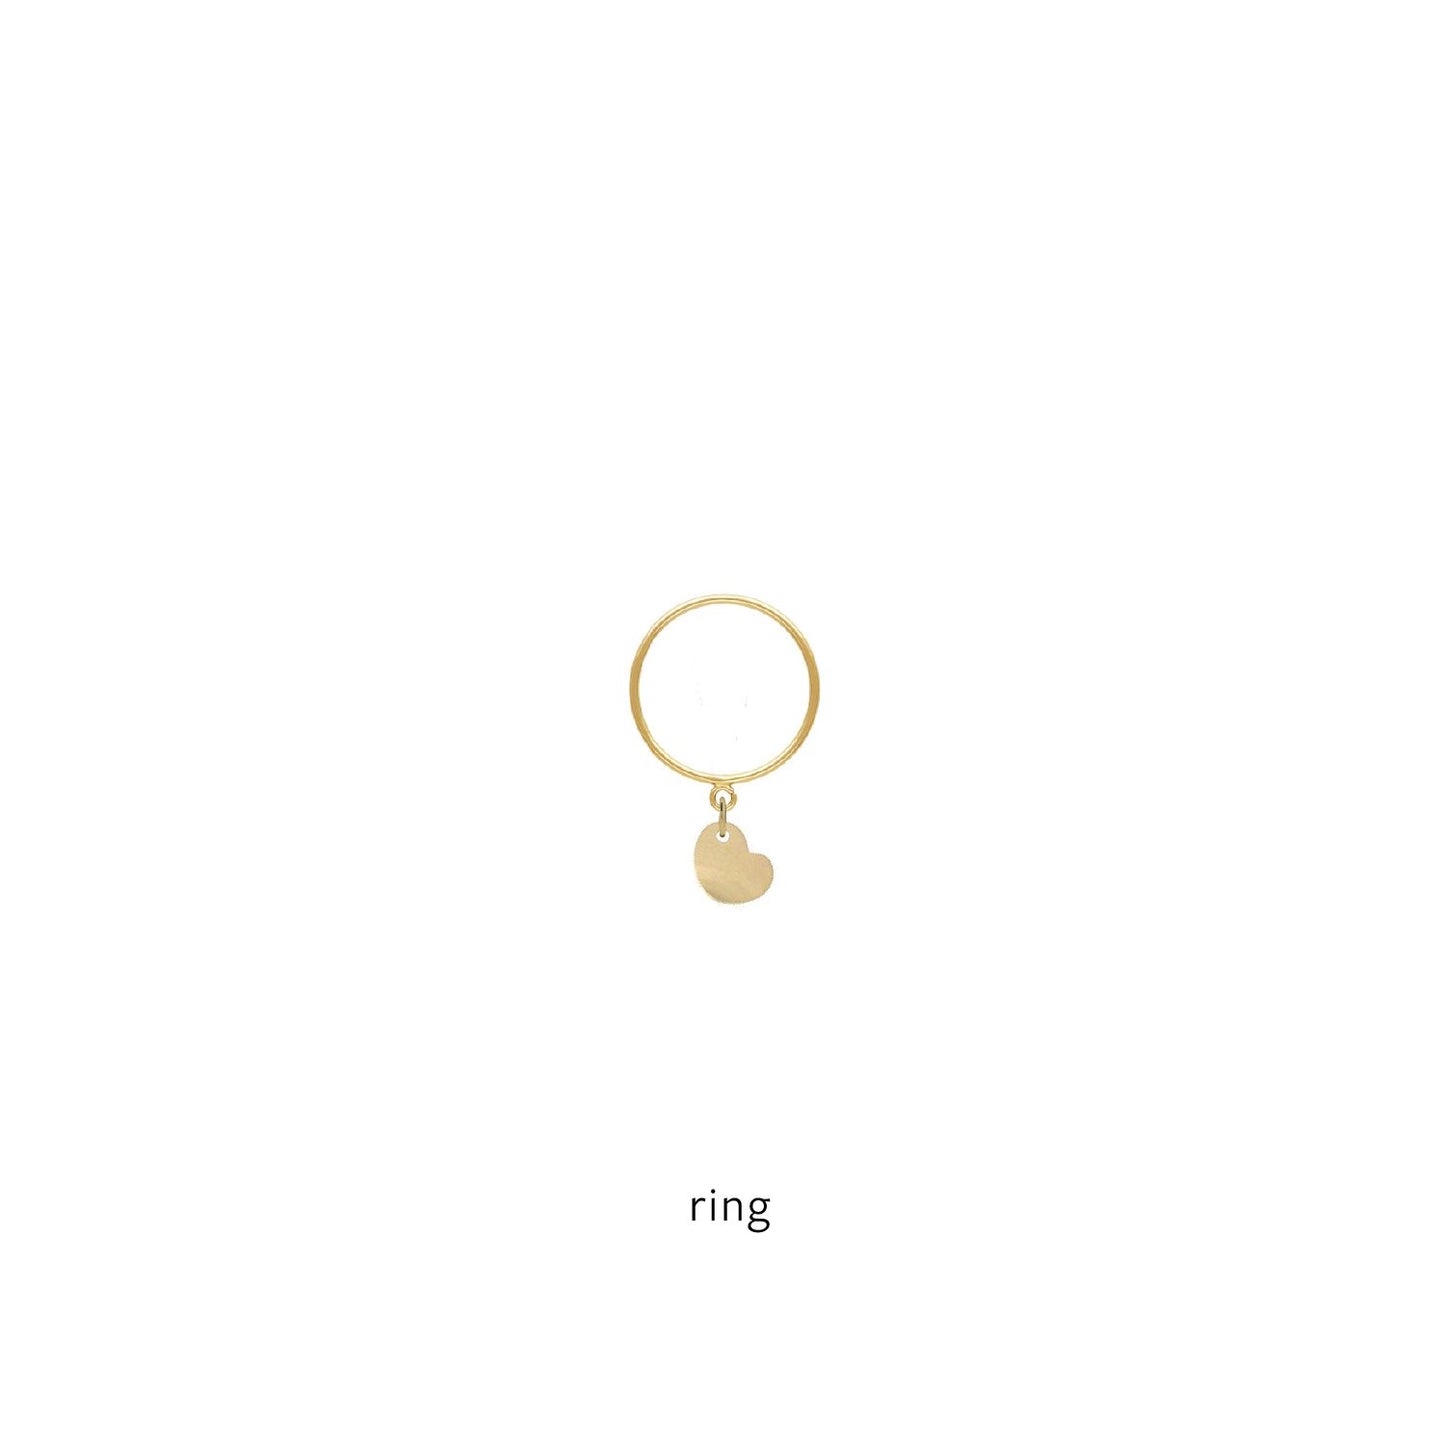 Tiny Heart - NEW Mini Collection Robyn Canady 14K Gold Filled Ring 